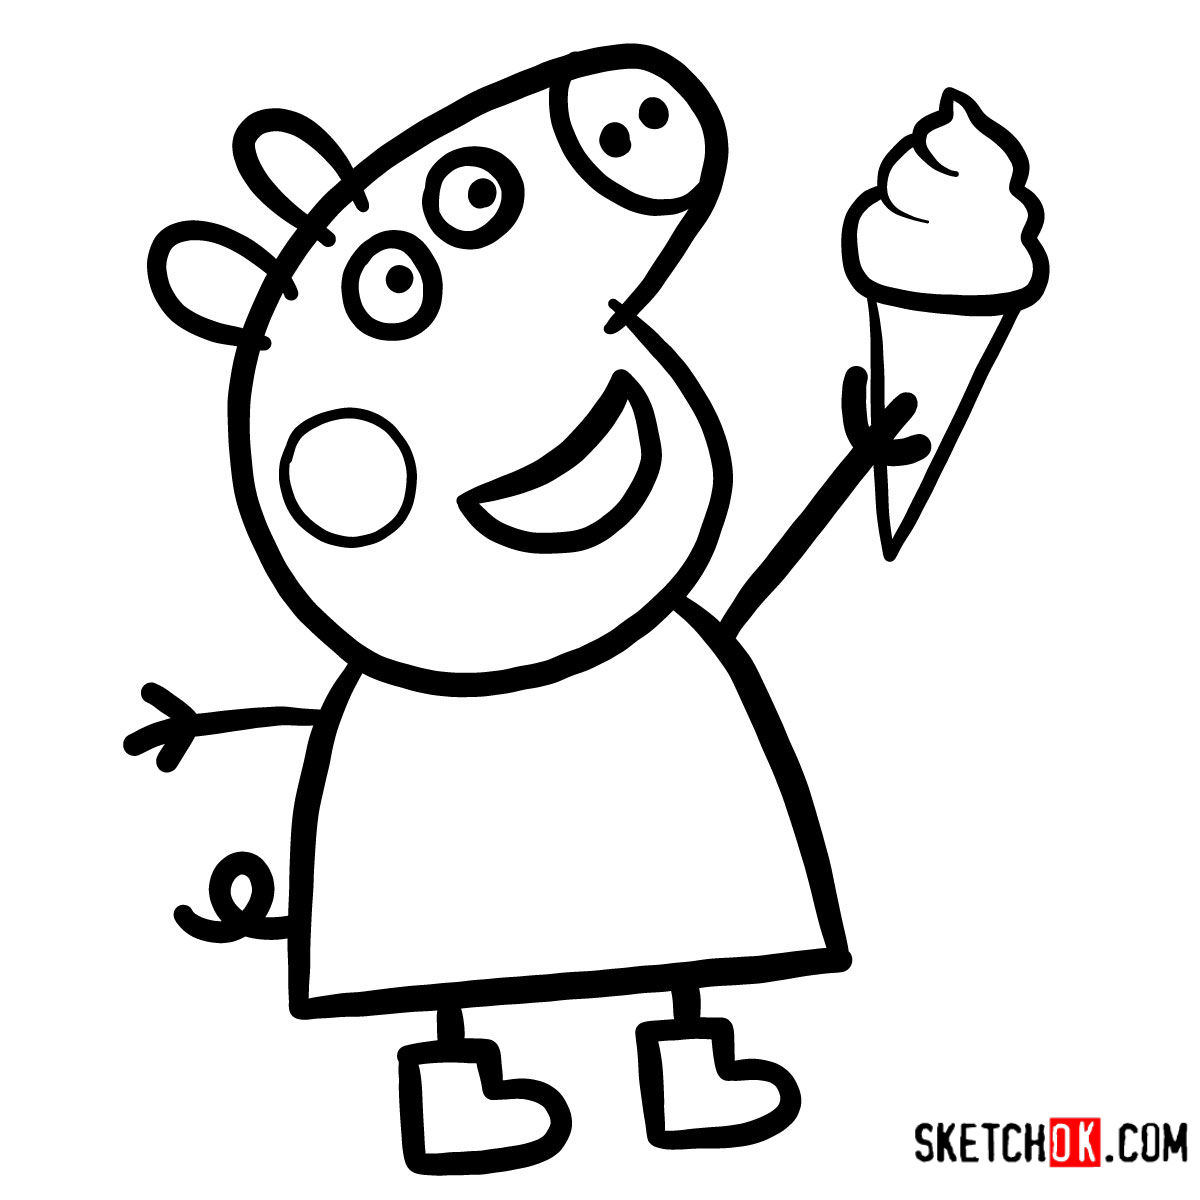 How to draw Peppa Pig with an icecream